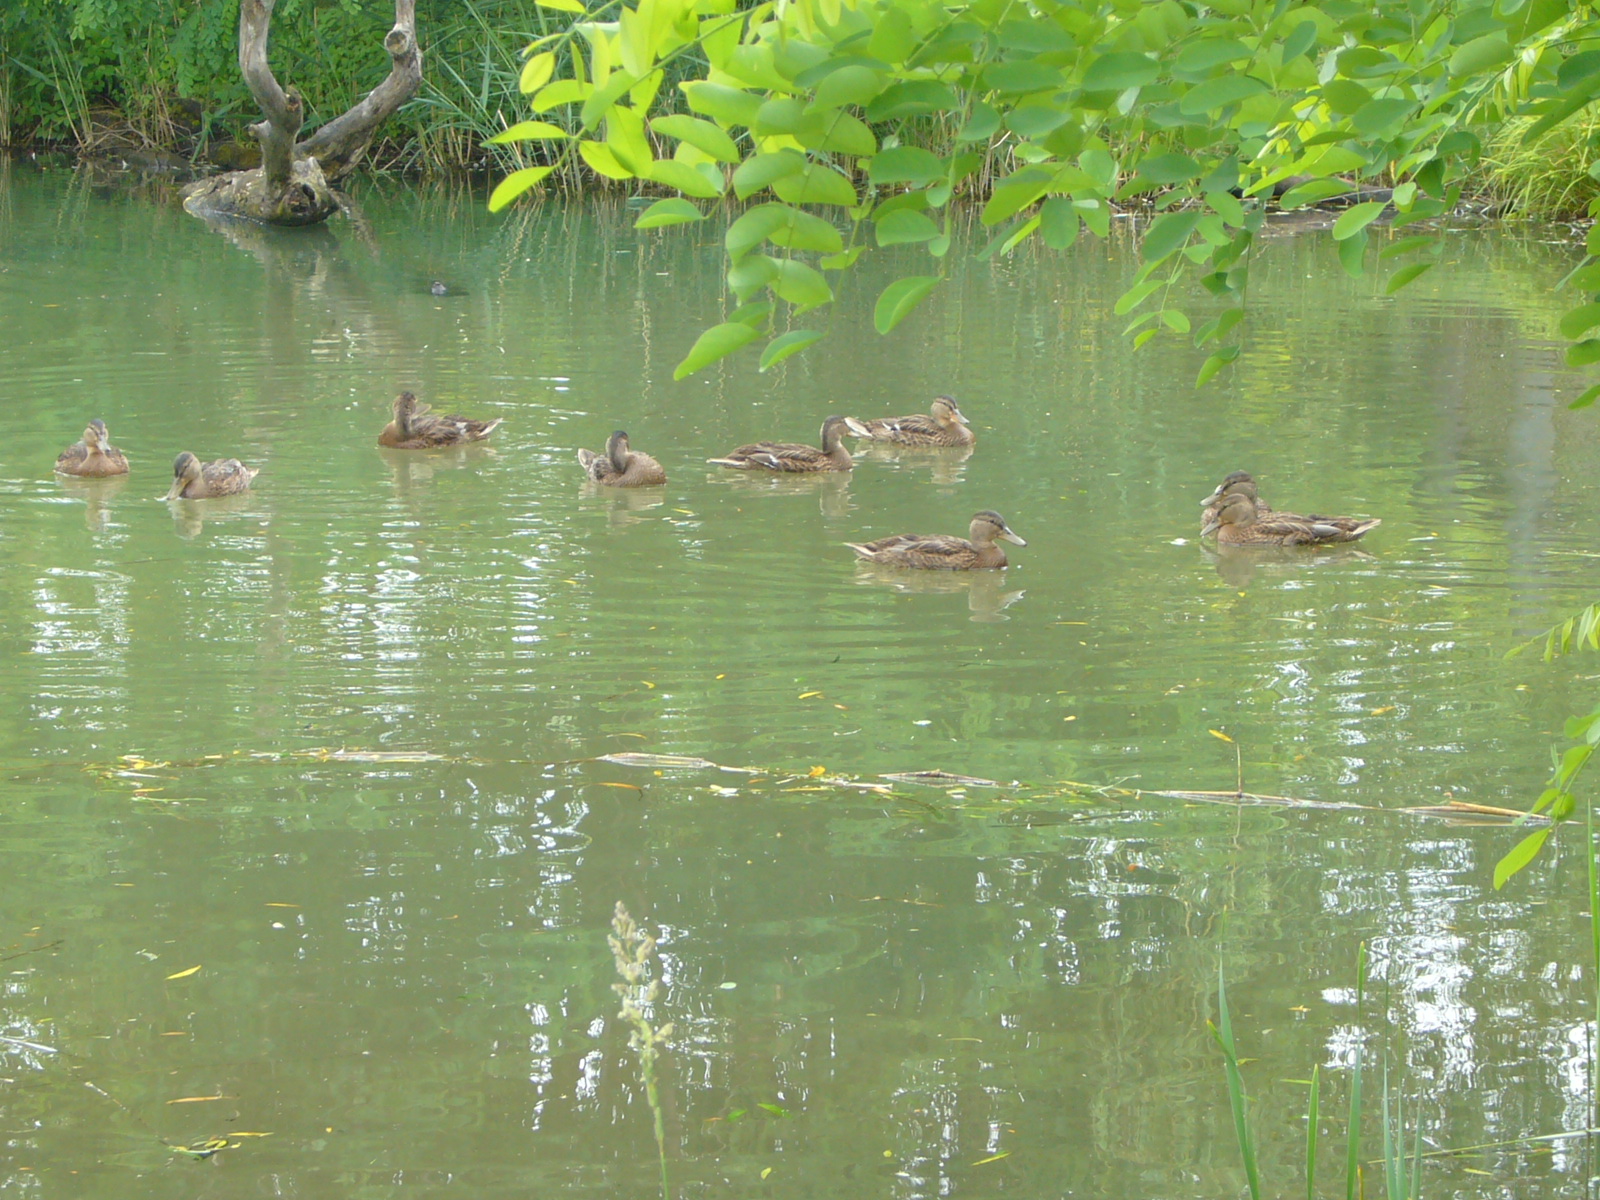 several ducks floating on a pond surrounded by greenery